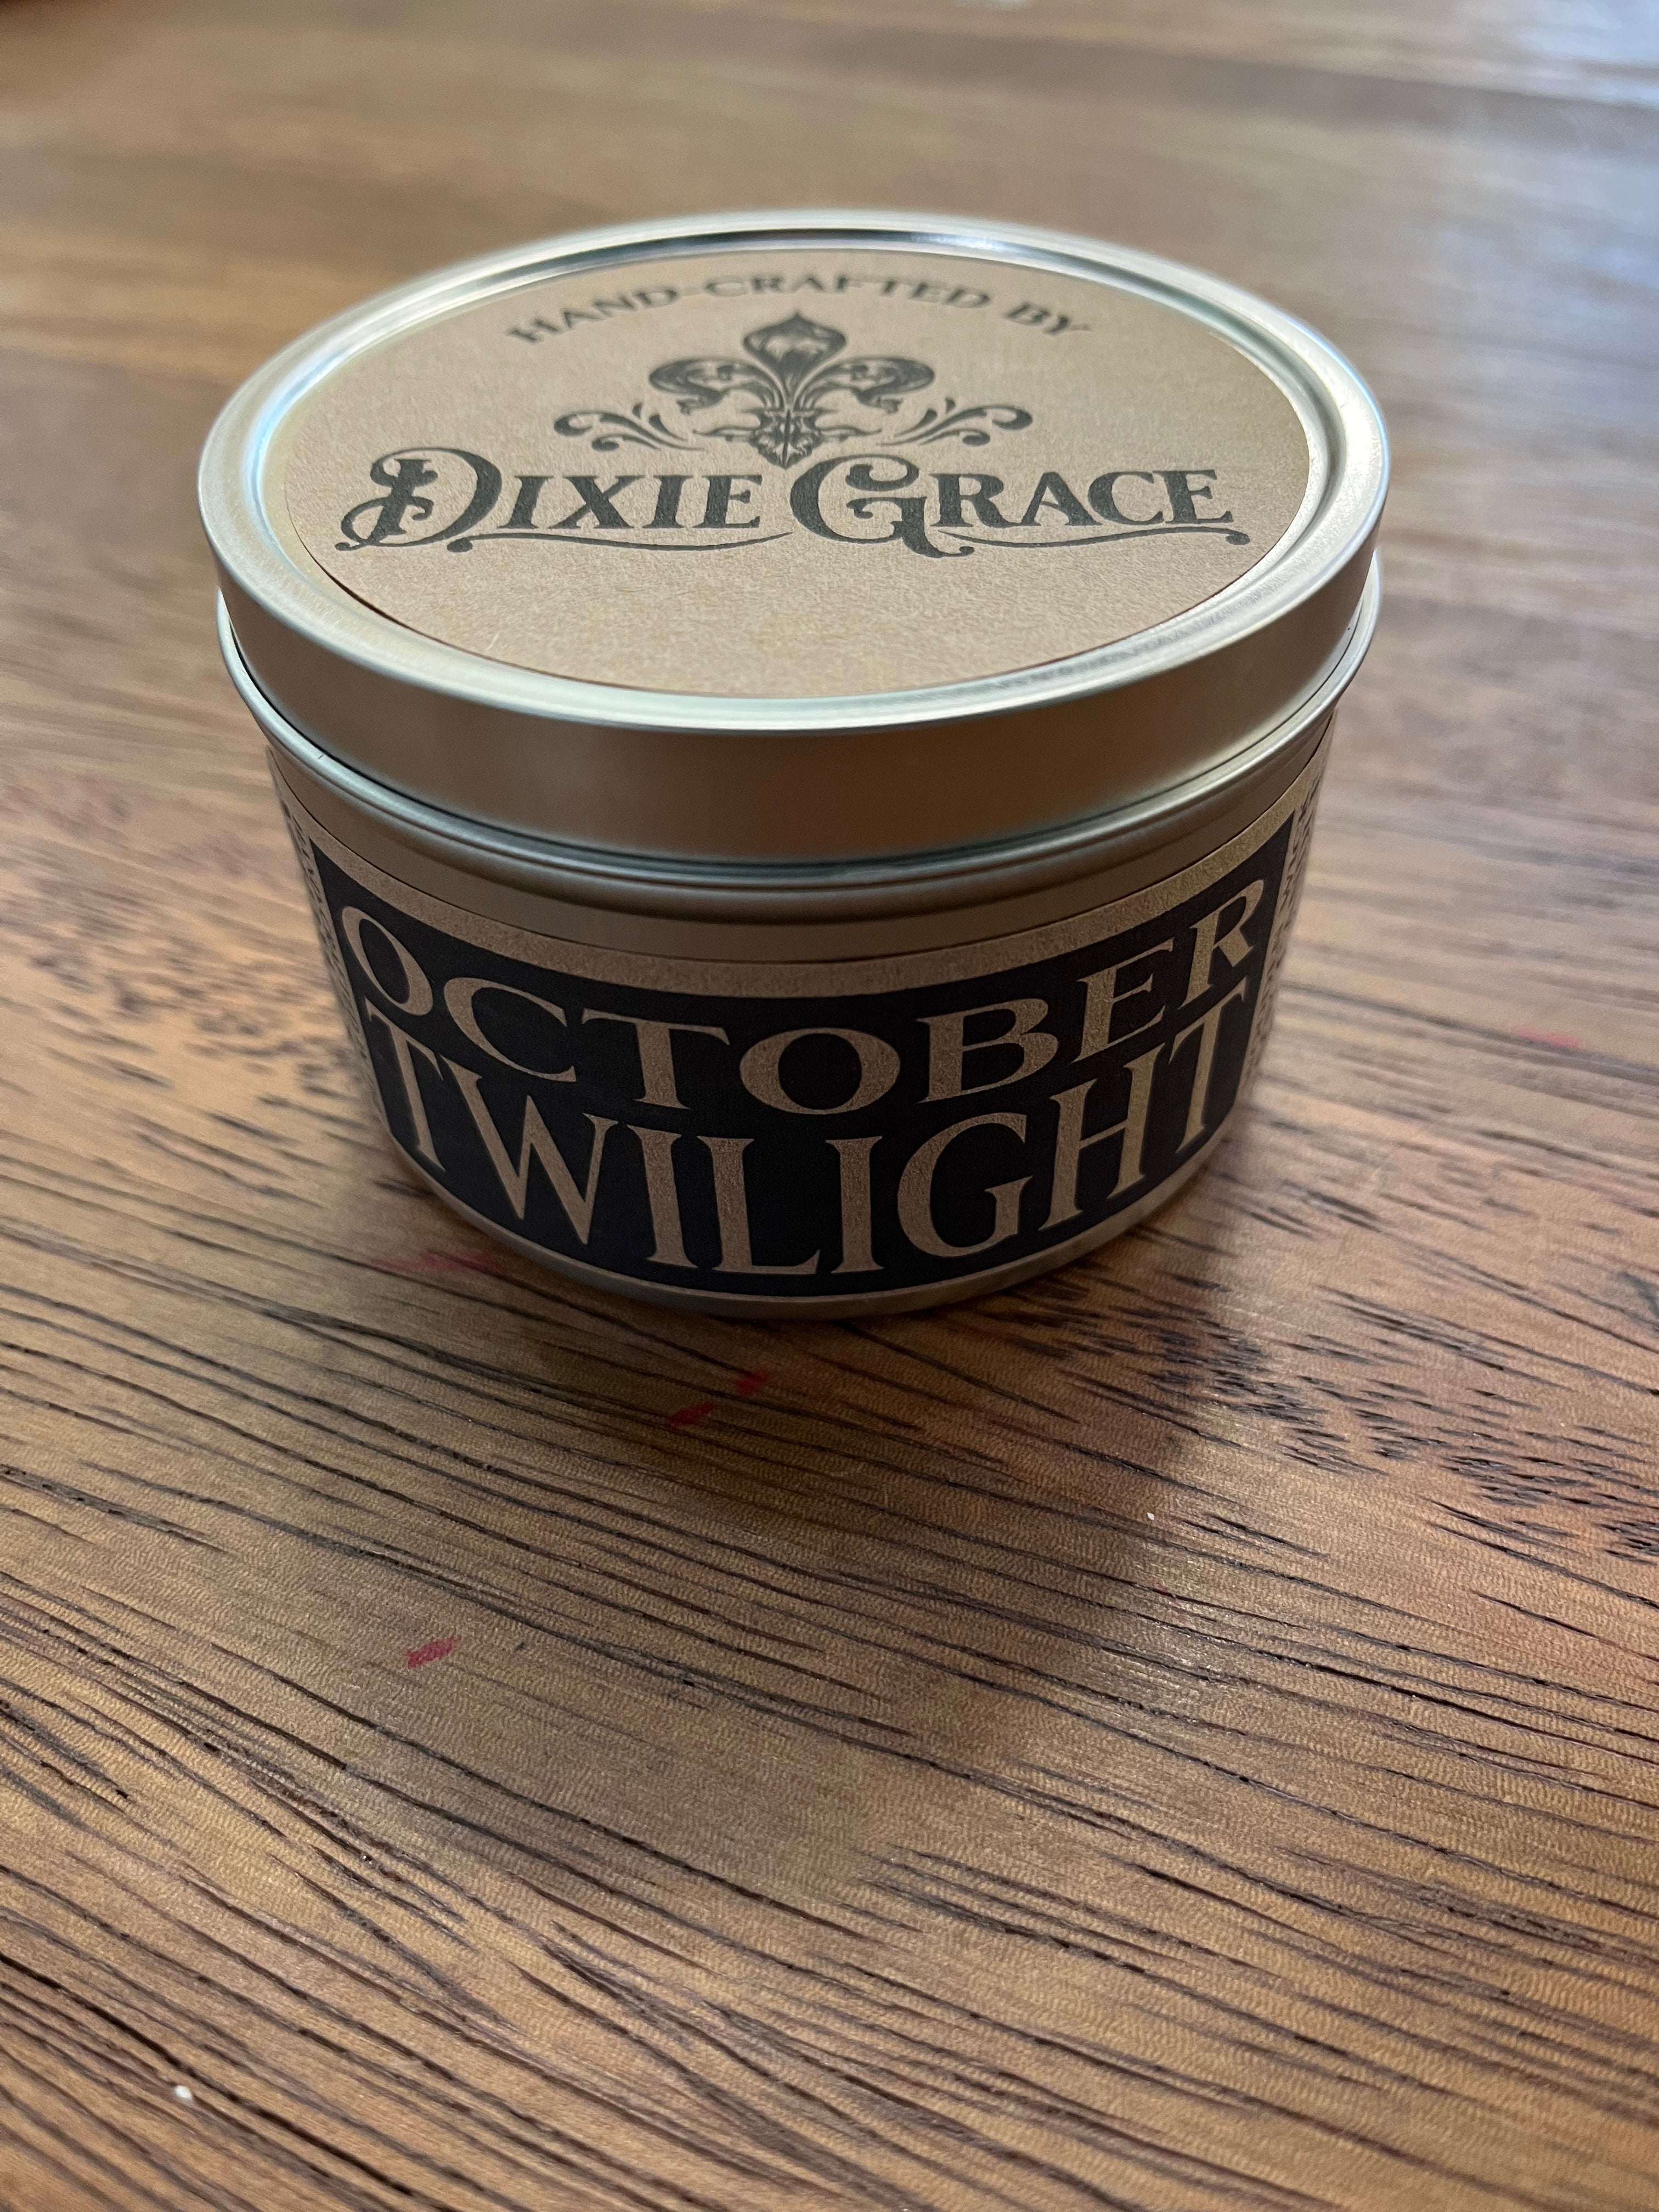 “Dixie Grace Candle Company”